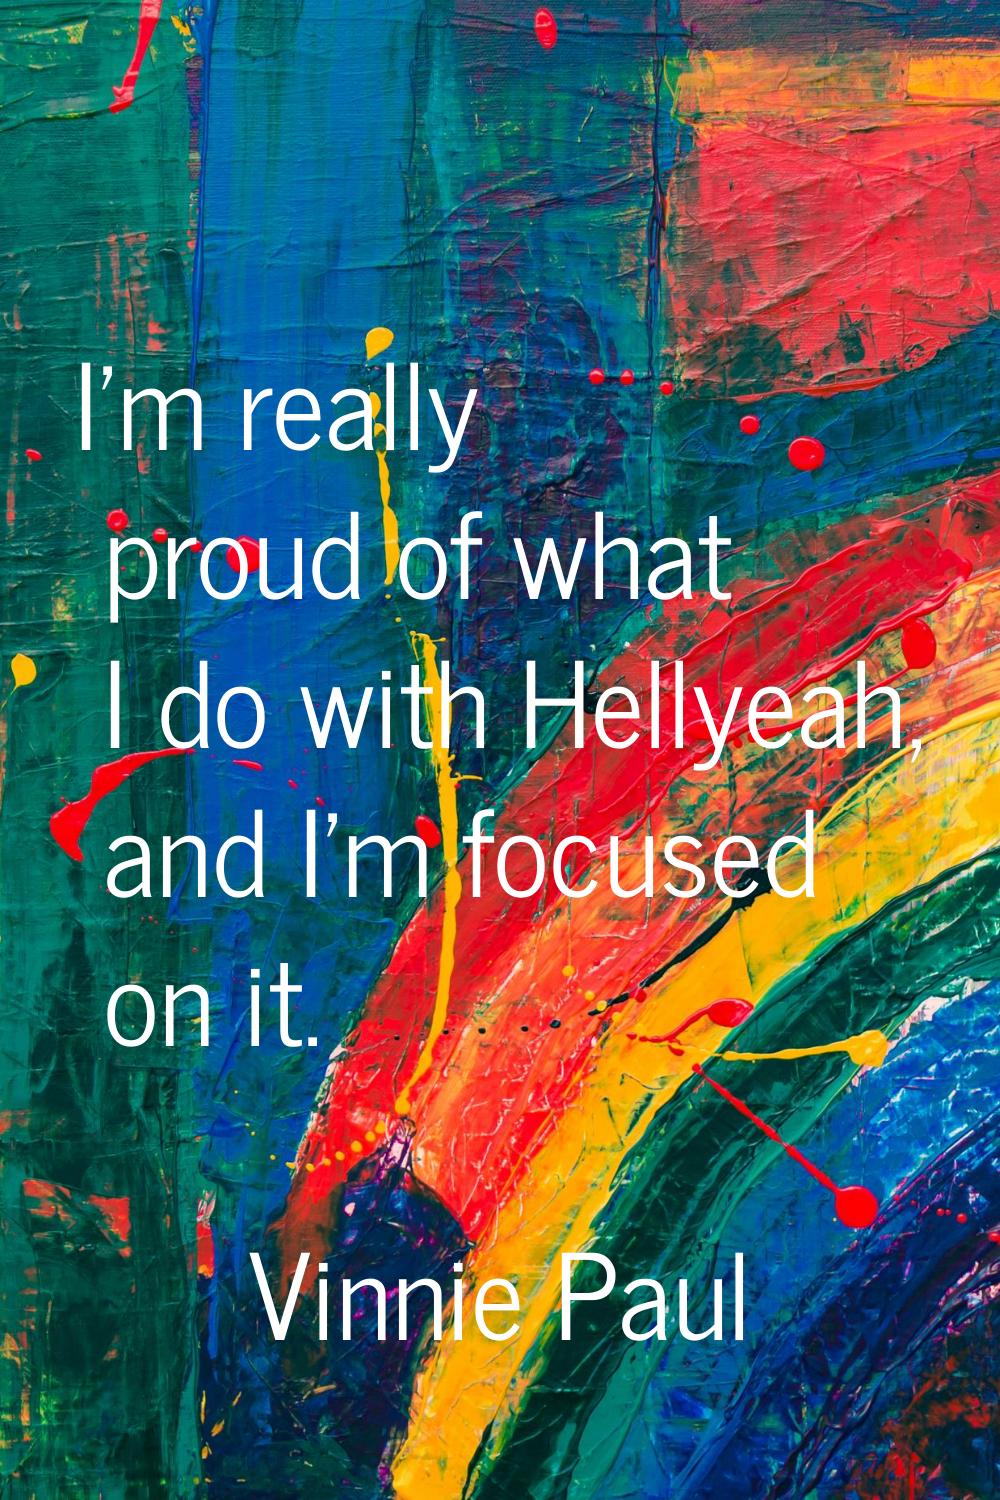 I'm really proud of what I do with Hellyeah, and I'm focused on it.